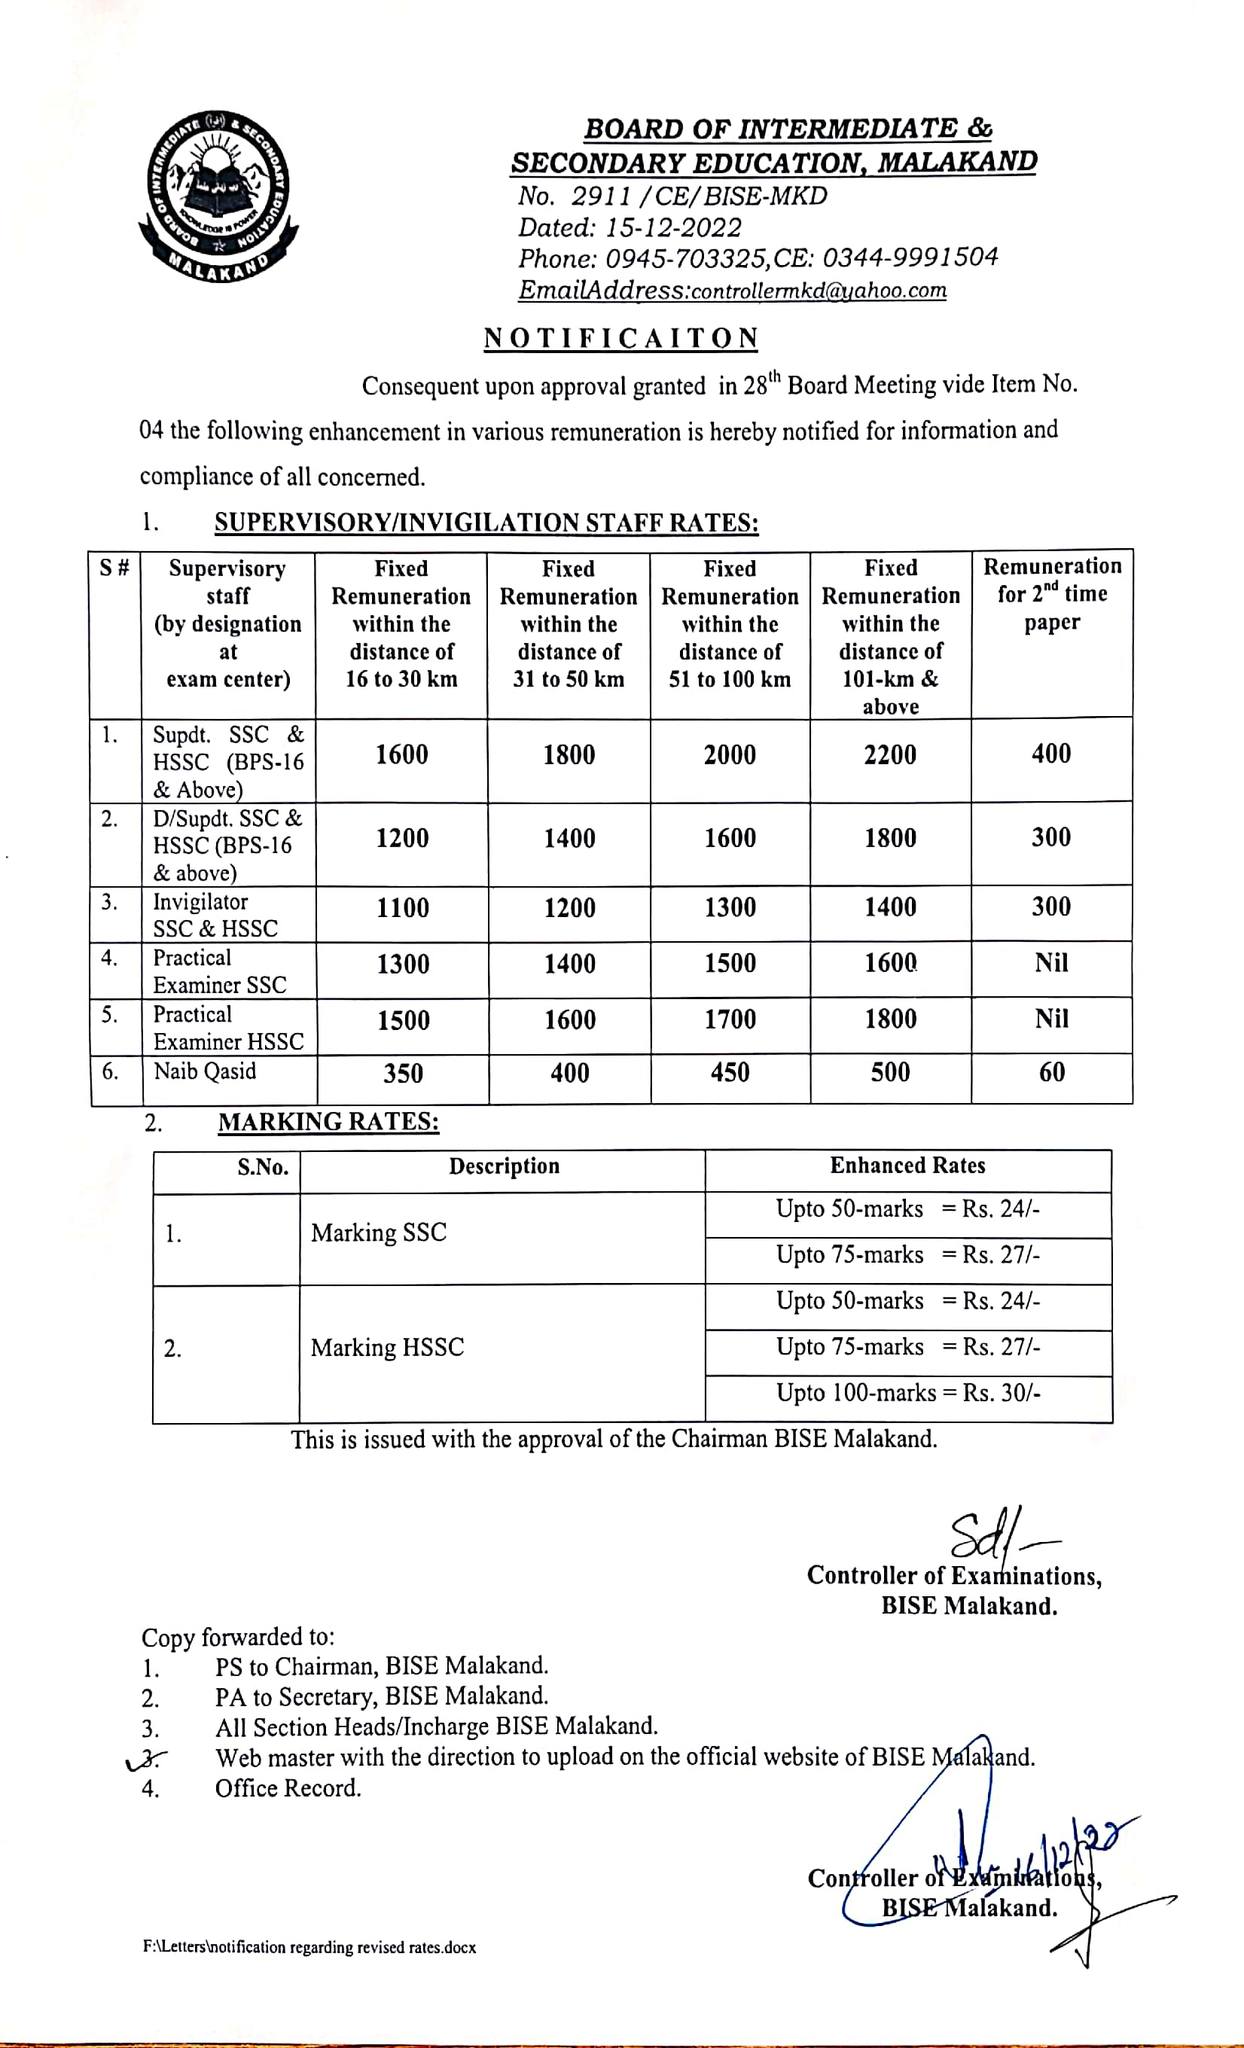 Revised Remuneration Rates Supervisory Staff and Marking Rates by BISE Malakand